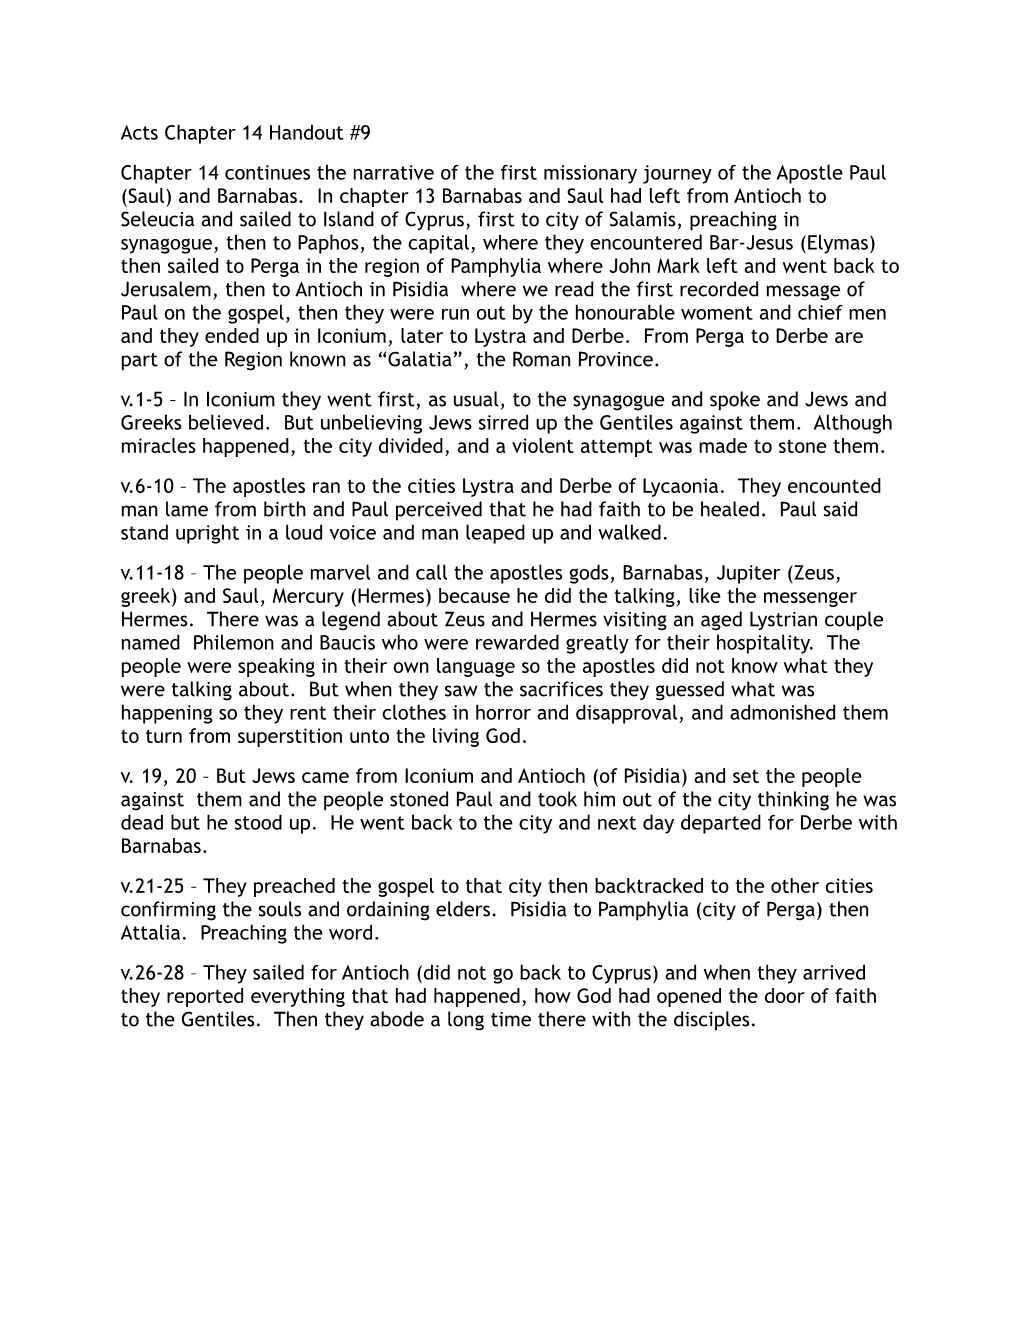 Acts Chapter 14 Handout #9 Chapter 14 Continues the Narrative of the First Missionary Journey of the Apostle Paul (Saul) and Barnabas